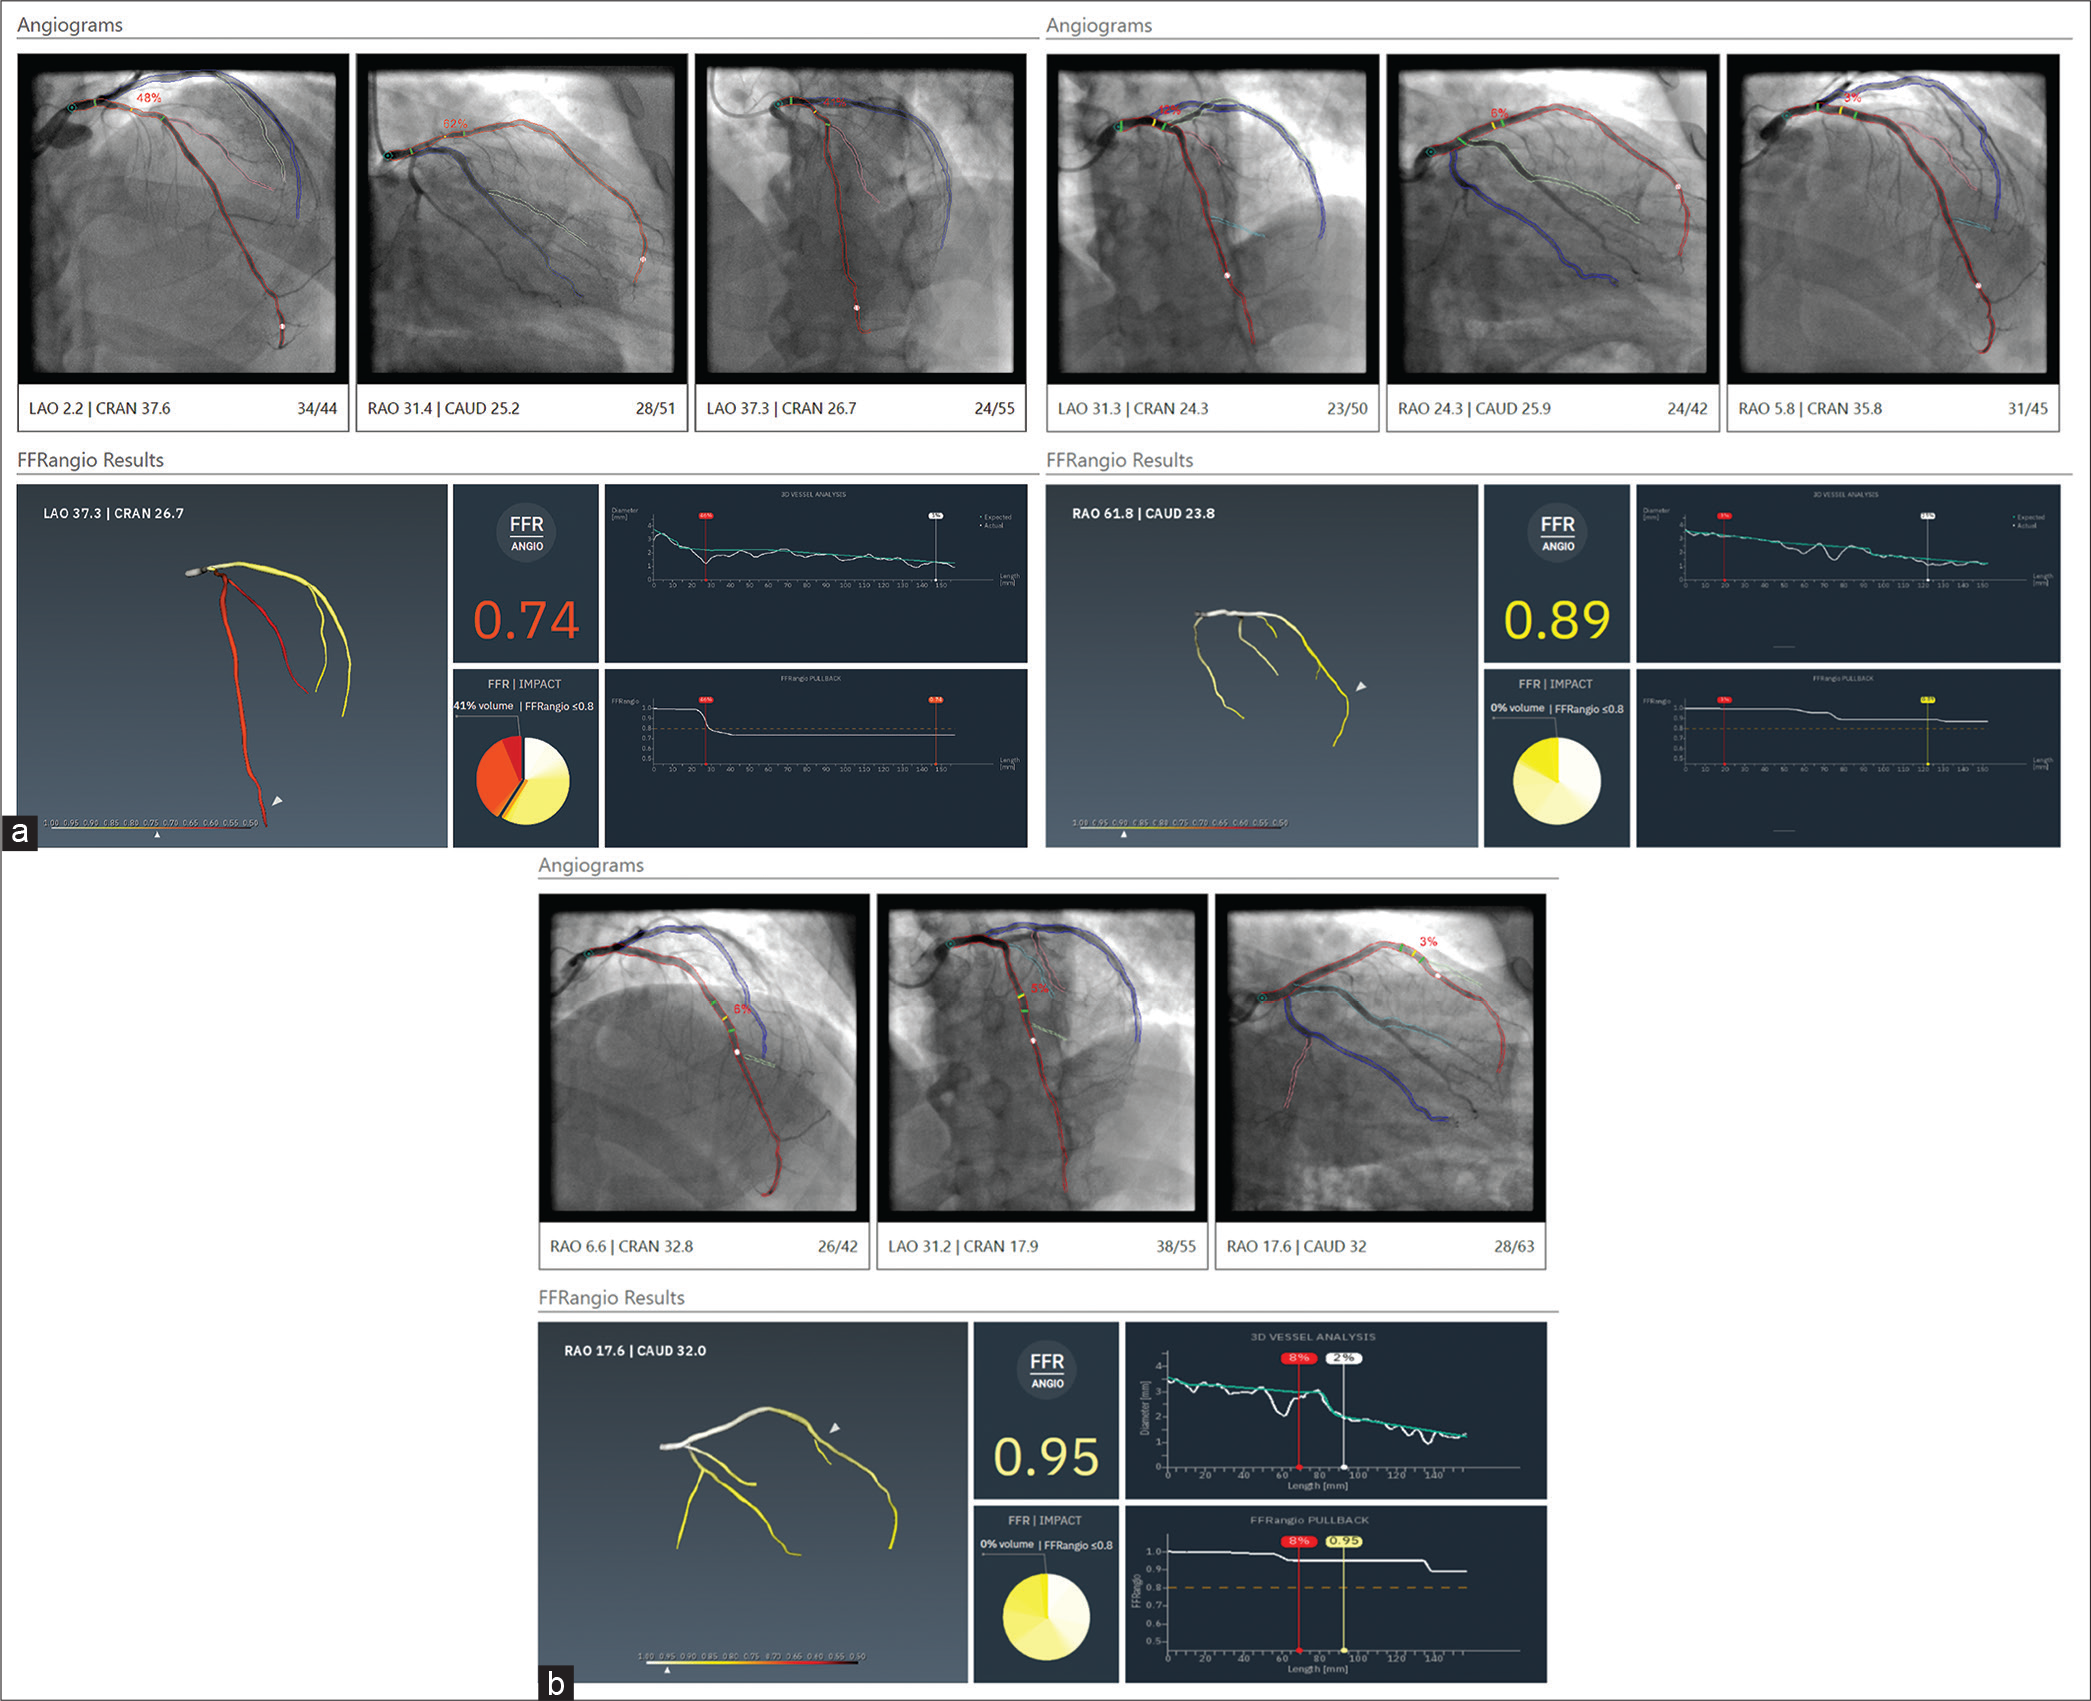 Angiographic reconstruction of the Left anterior descending artery and computation of fractional flow reserve. (a) Pre-percutaneous coronary intervention, (b) post-stent deployment, and (c) post-stent optimization.